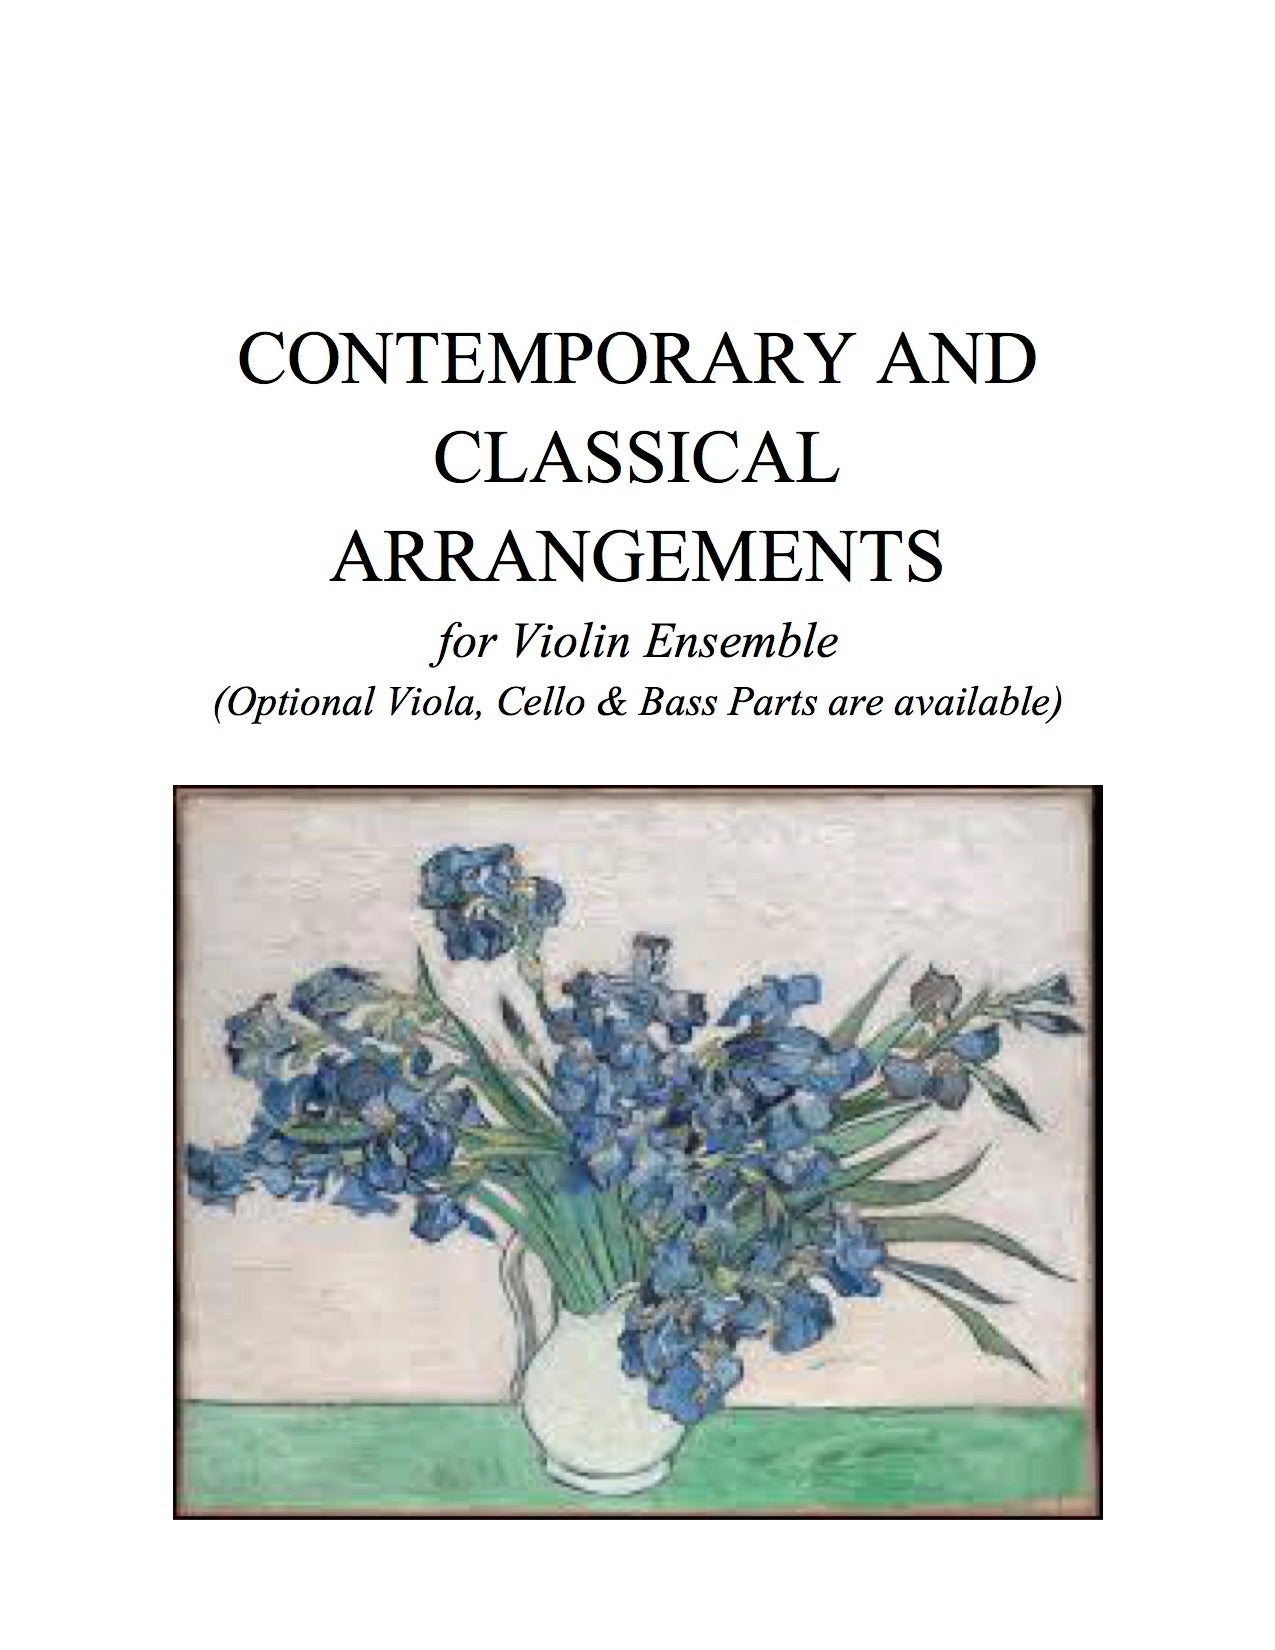 008 B - Contemporary and Classical Arrangements (includes BOTH Violin Ensemble book AND Optional Viola, Cello and Bass parts).